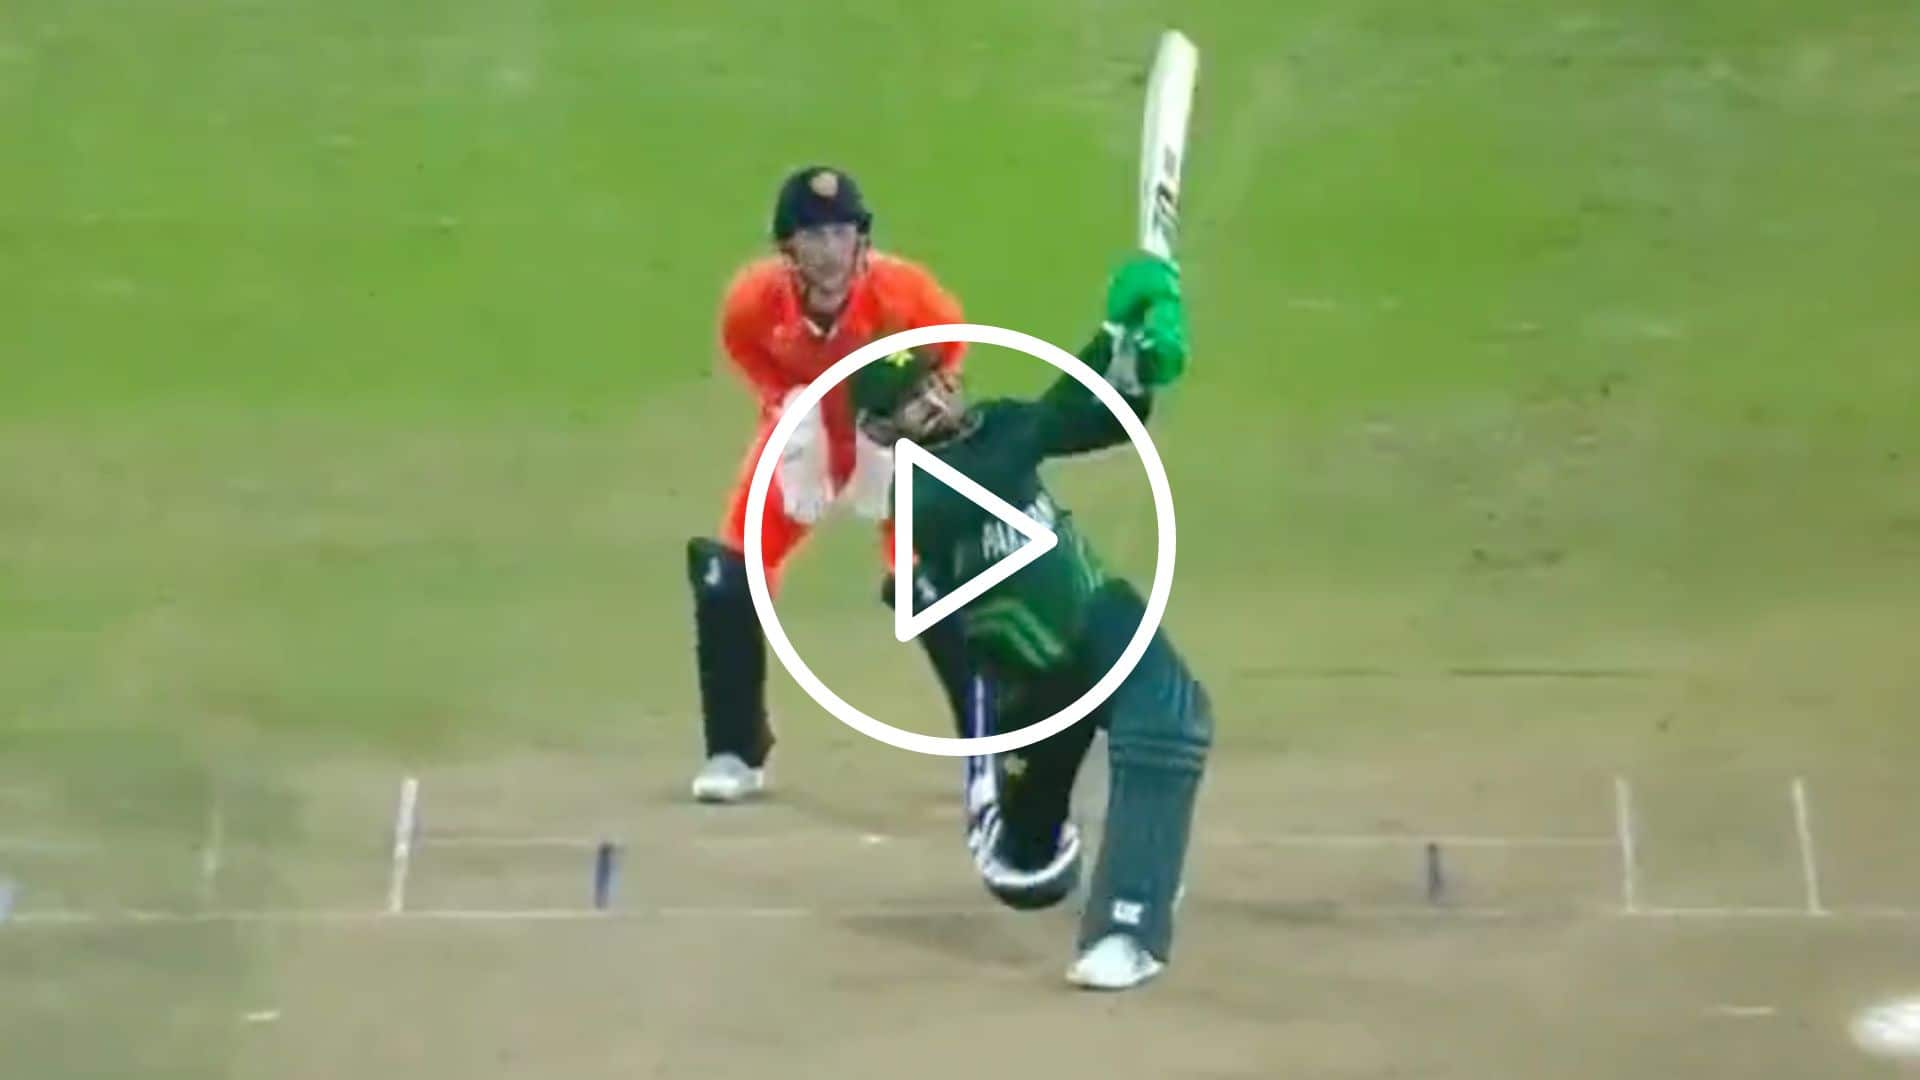 [Watch] Haris Rauf's Swashbuckling Six Sets The World Cup Stage On Fire